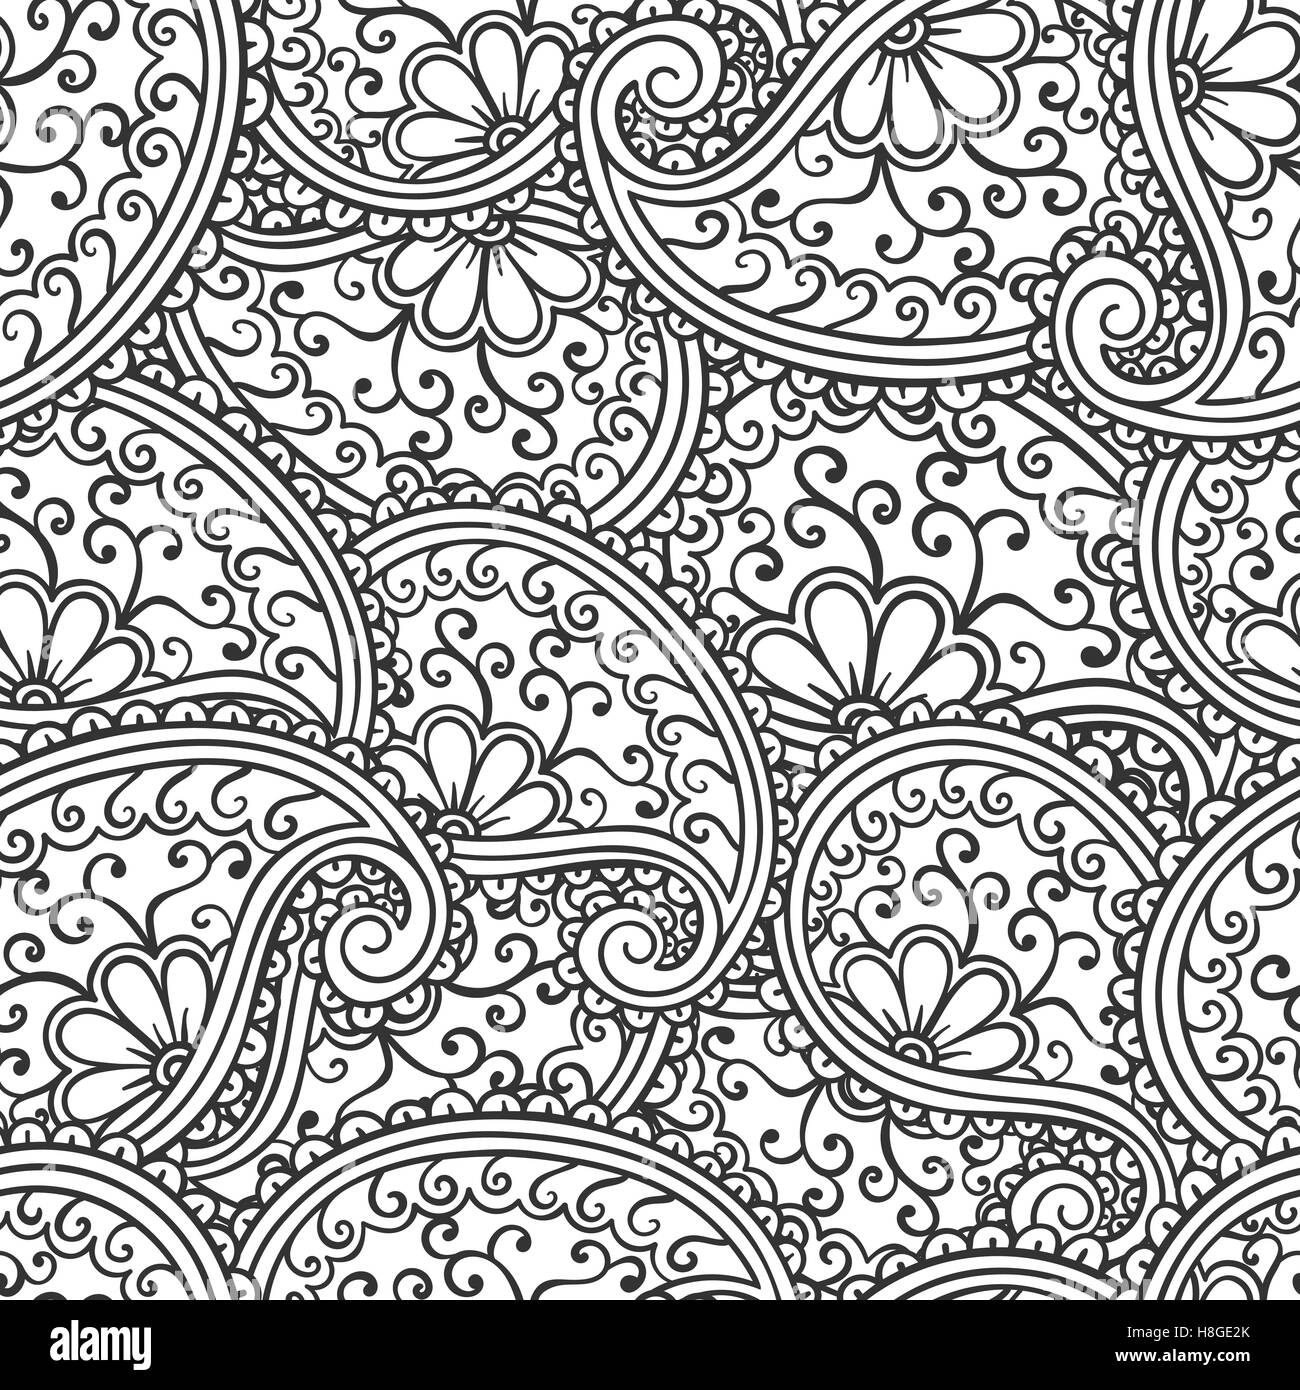 Hand drawn seamless Paisley pattern. Doodle style Stock Vector Image ...